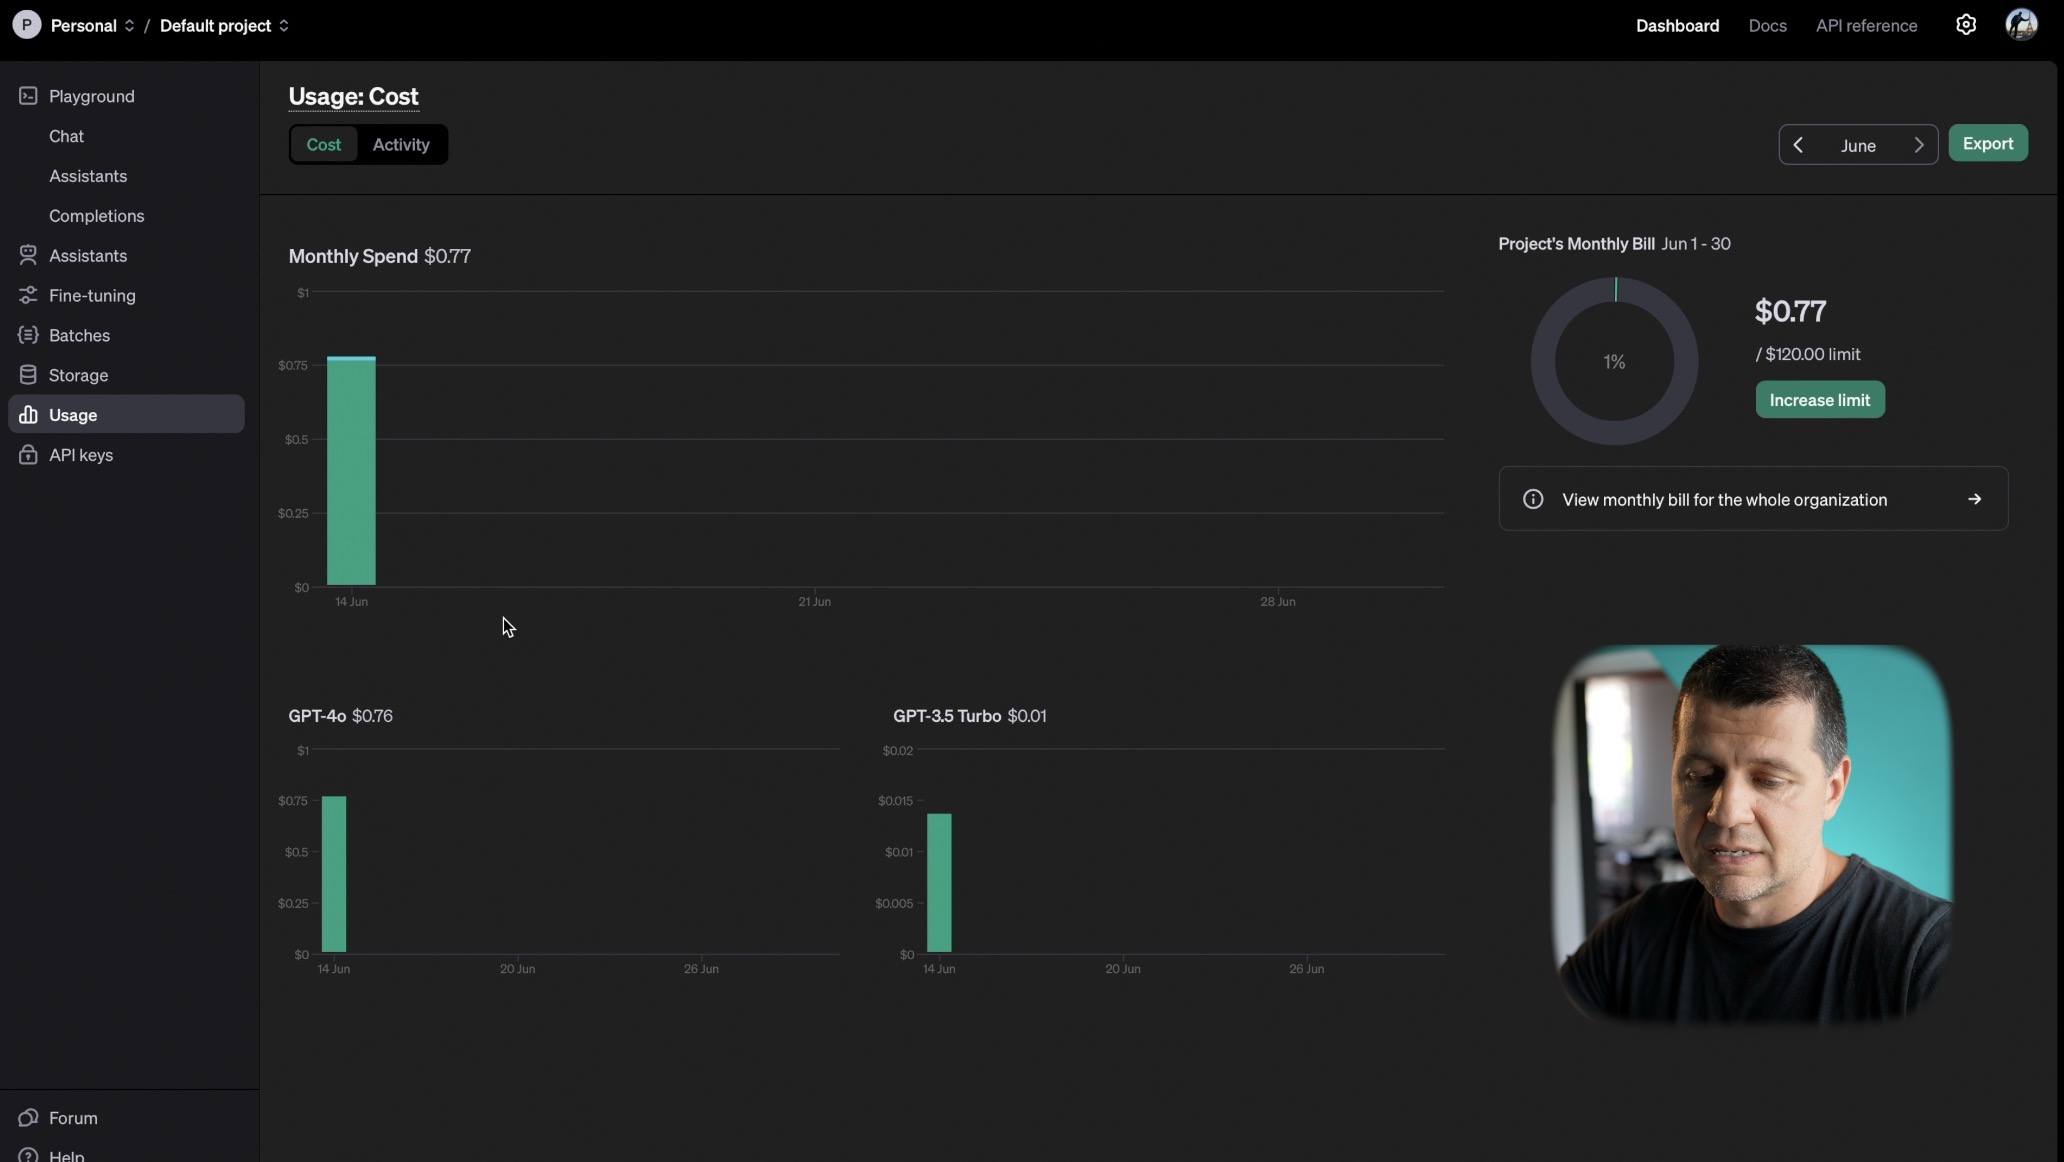 OpenAI portal where I can see the usage cost of the Home Assistant ChatGPT integration